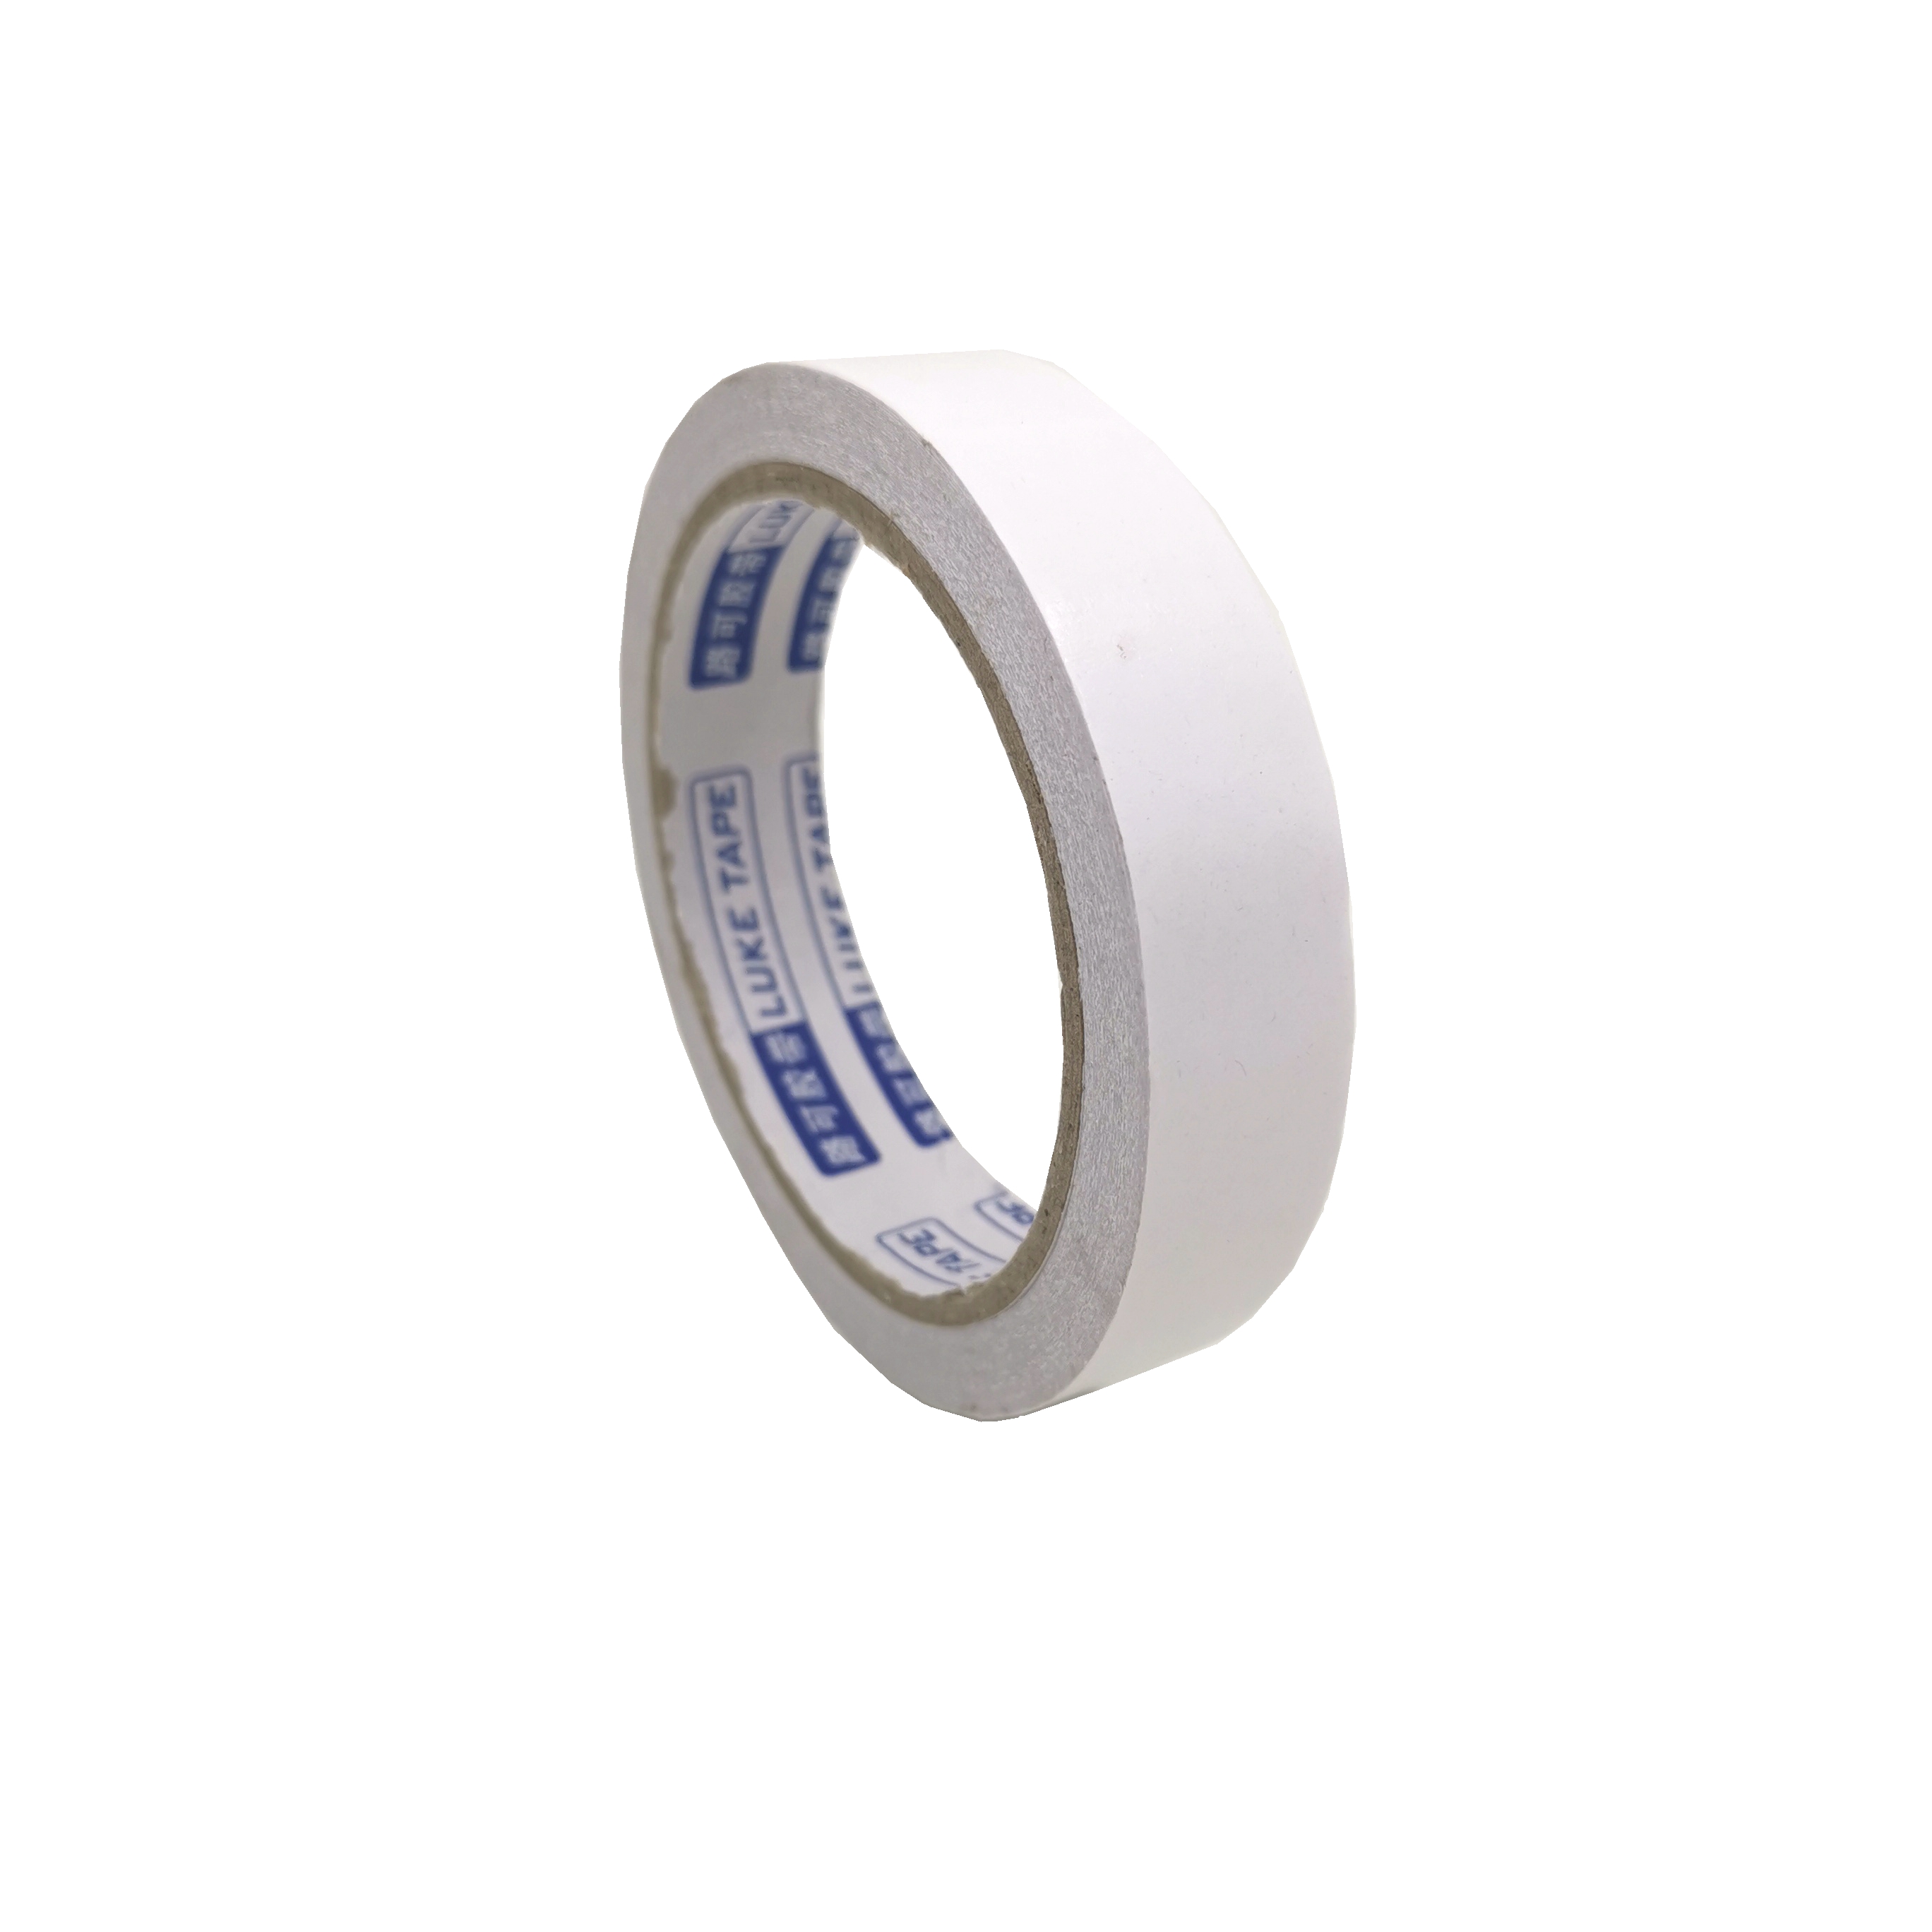 2mm double sided tape home depot